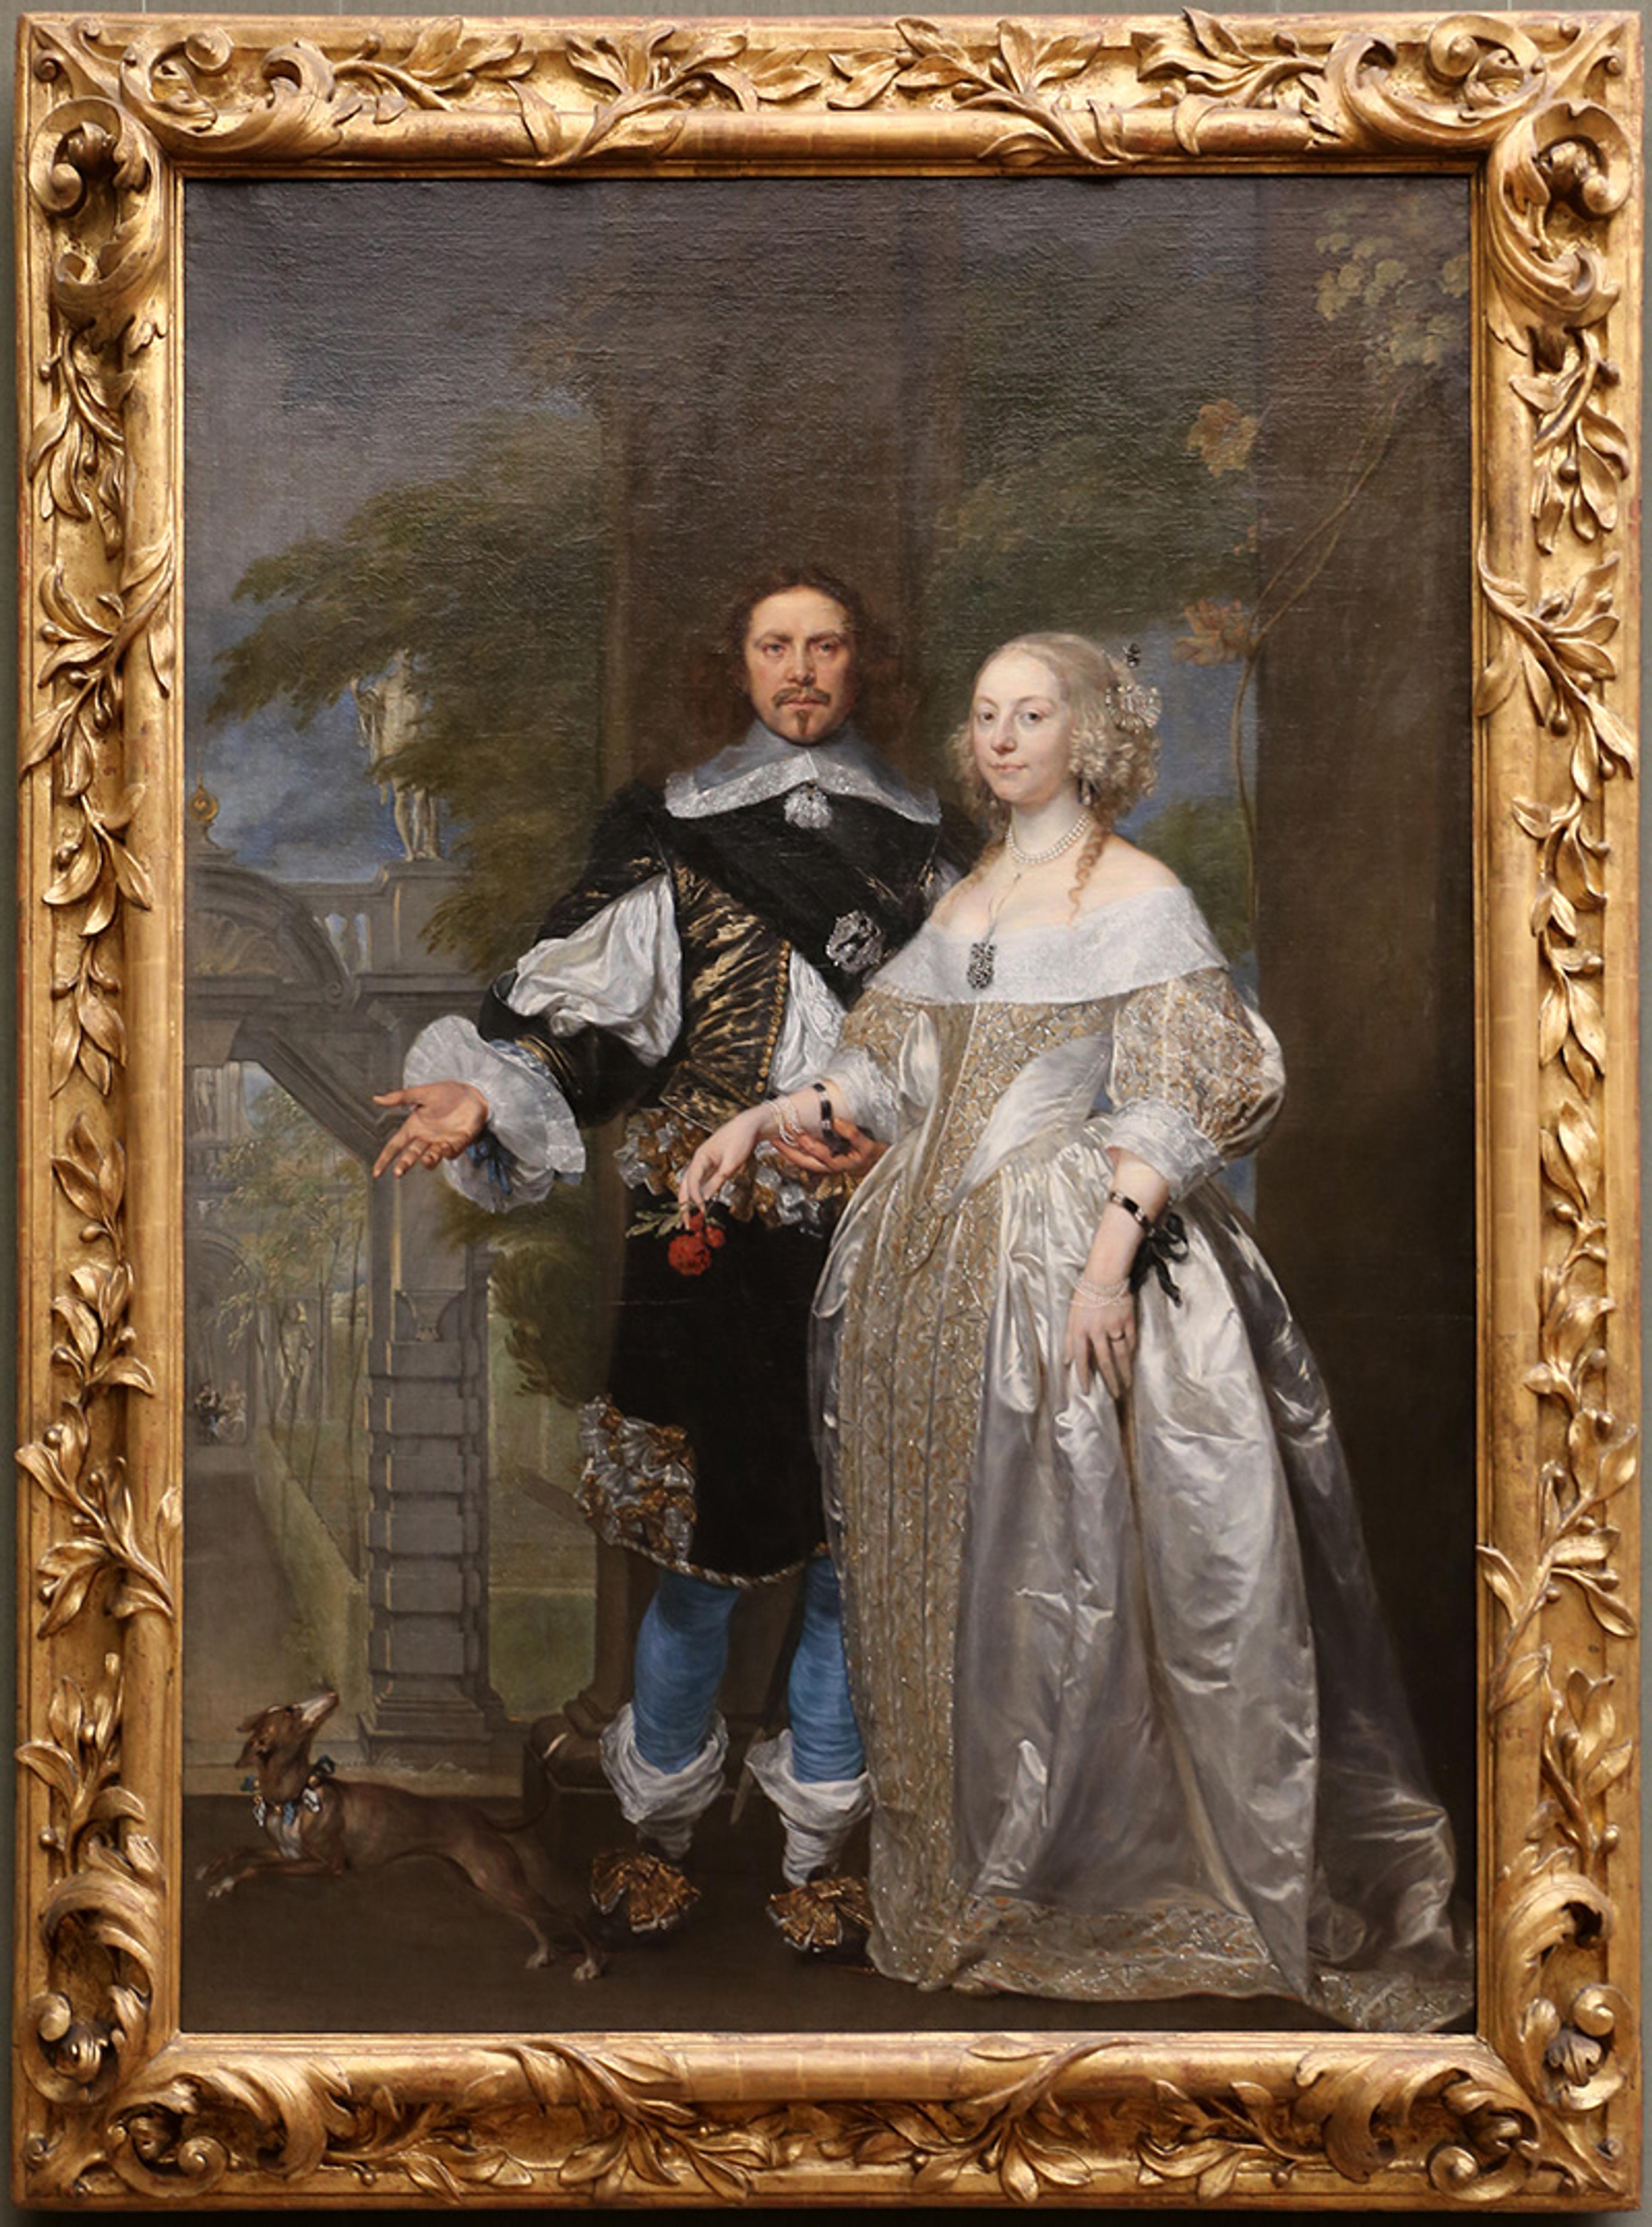 A framed painting of a historical couple in elaborate attire stands together. The man, on the left, holds a hat and wears a black and gold outfit, while the woman, on the right, wears a silver gown with intricate details. A small dog lies at their feet. Trees and architectural elements are visible in the background.